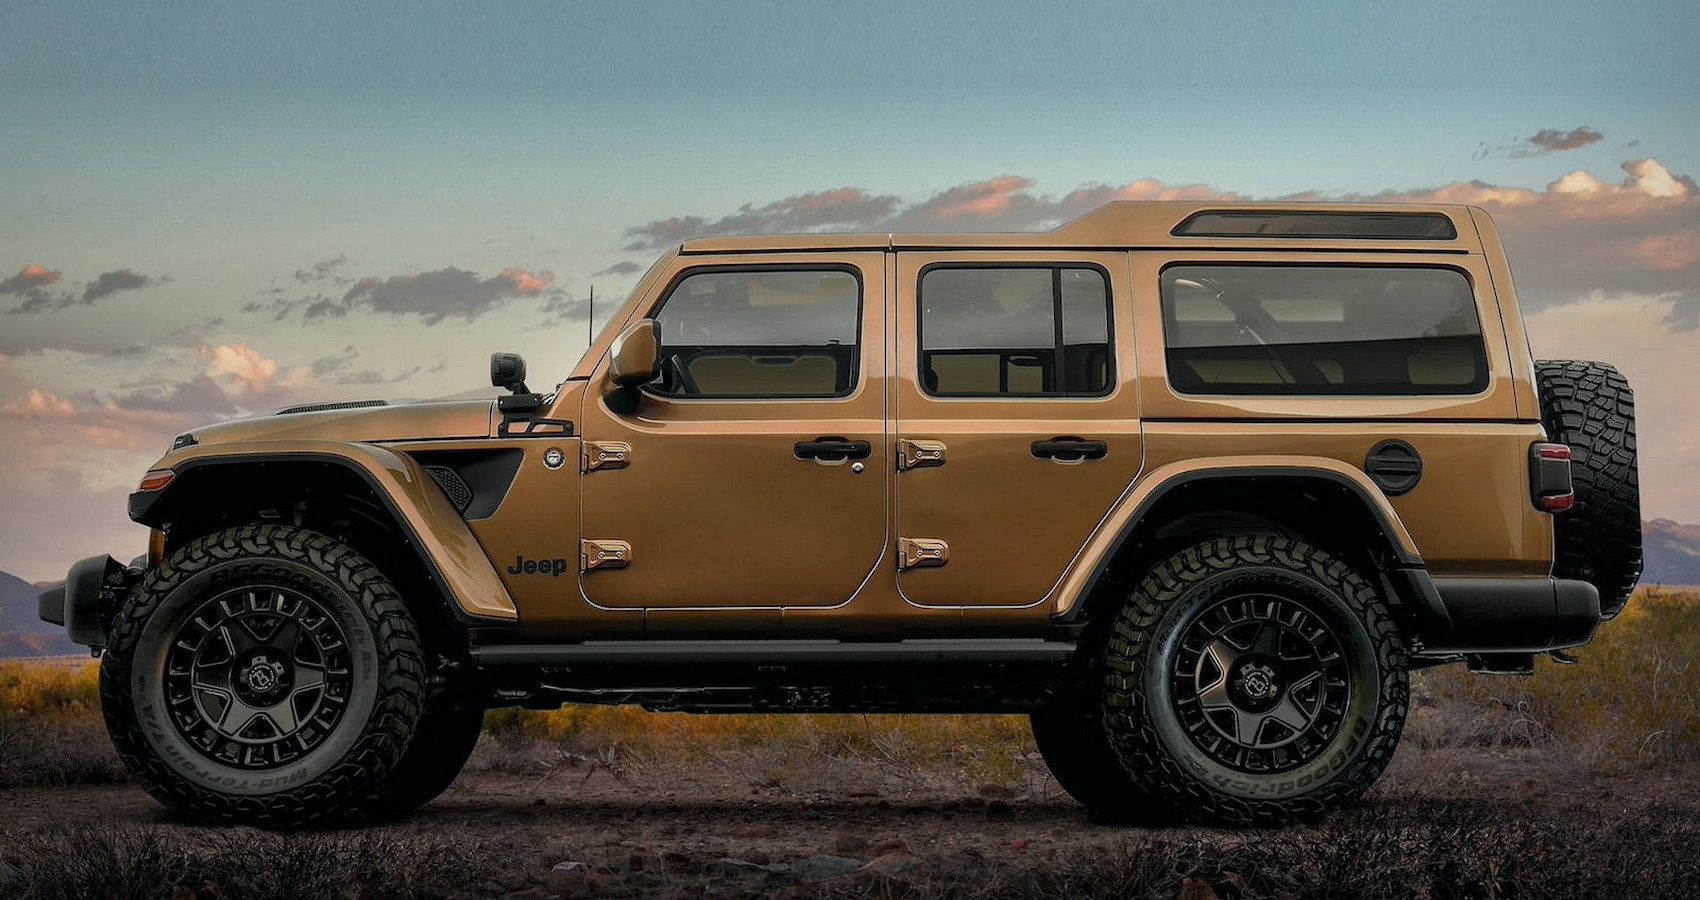 The Jeep Wrangler Overlook Concept Is The ThreeRow SUV We Desperately